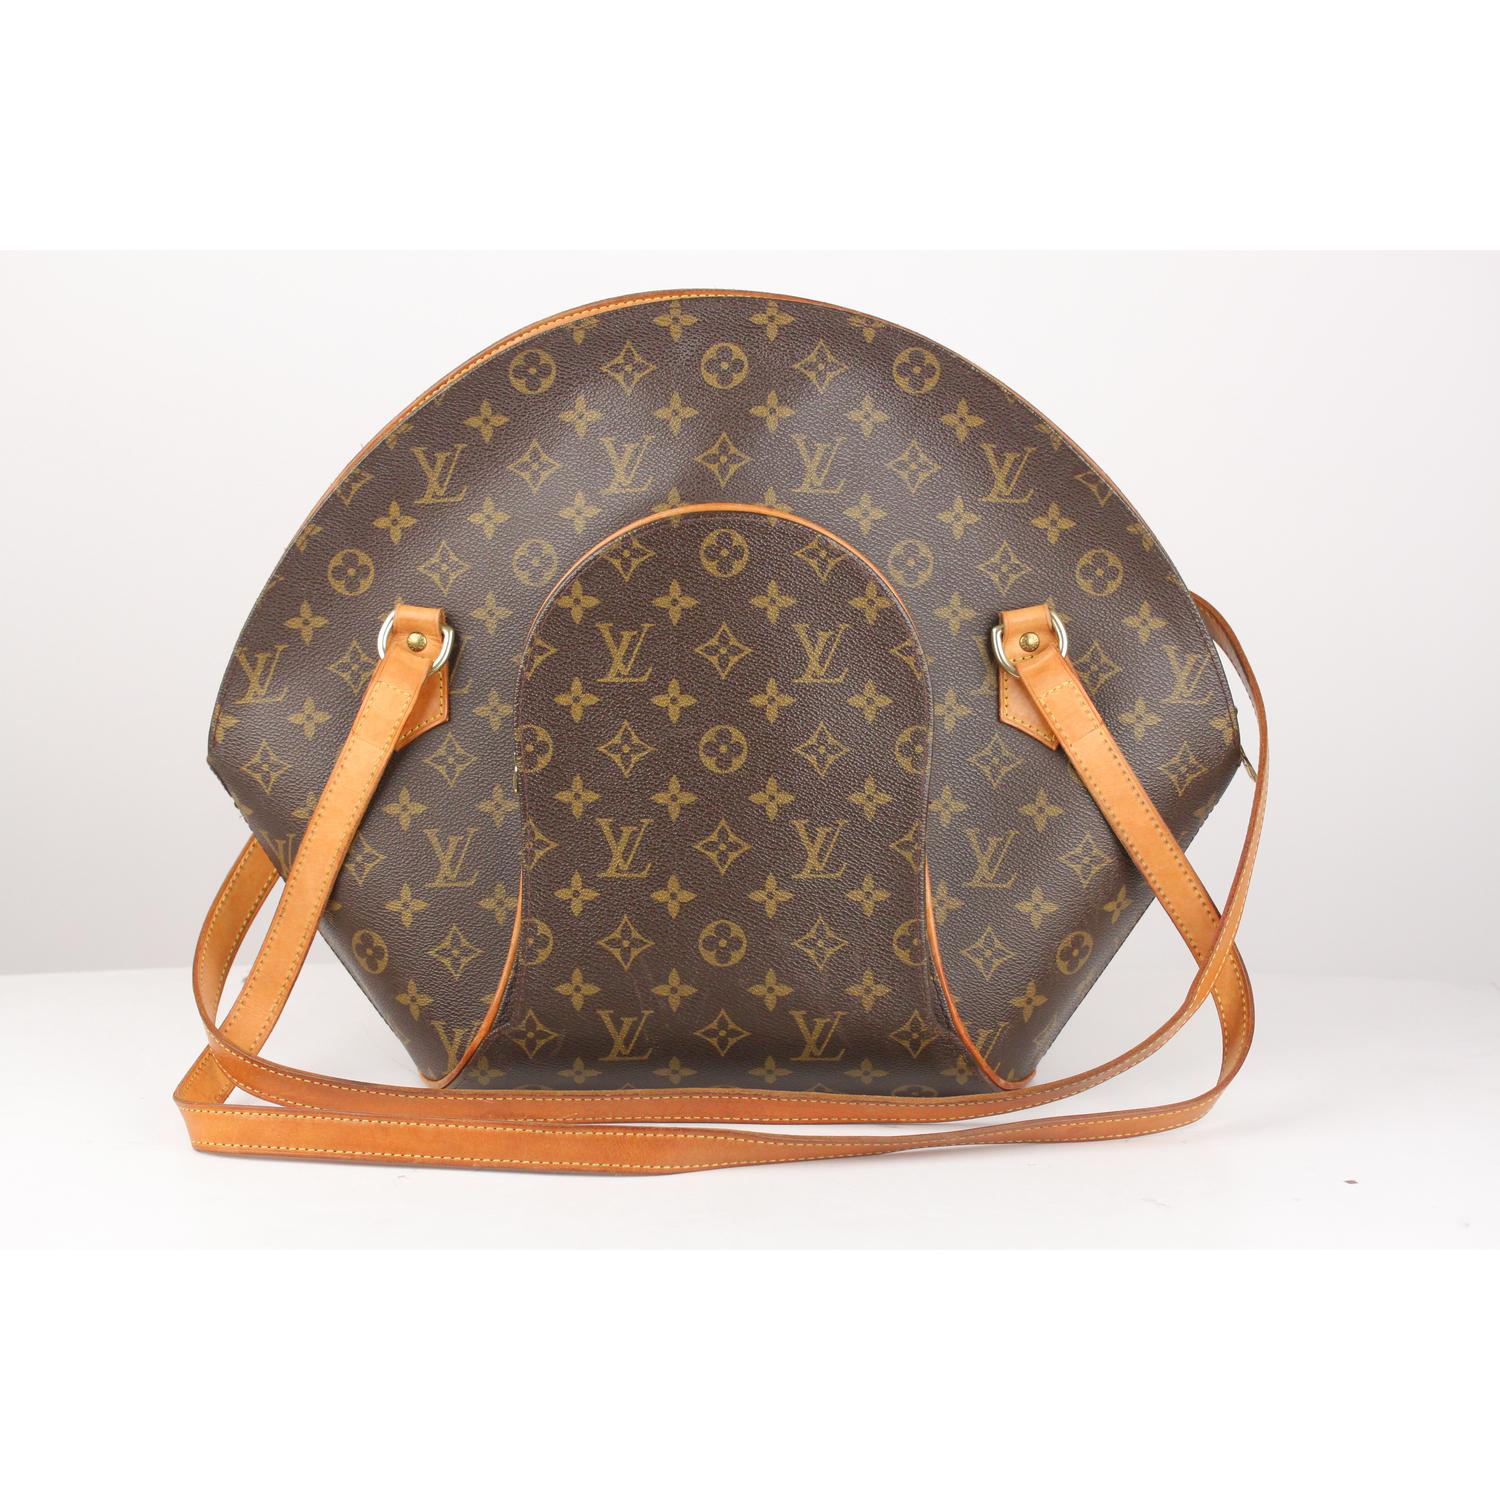 - Sophisticated Louis Vuitton 'Ellipse' Shoulder bag
- Top is closed with double zipper
- Front zip pocket
- Long shoulder straps with gold metal hardware
- 1 open pocket and D-Ring inside
- Textile-lined inside

Logos / Tags: LV - LOUIS VUITTON